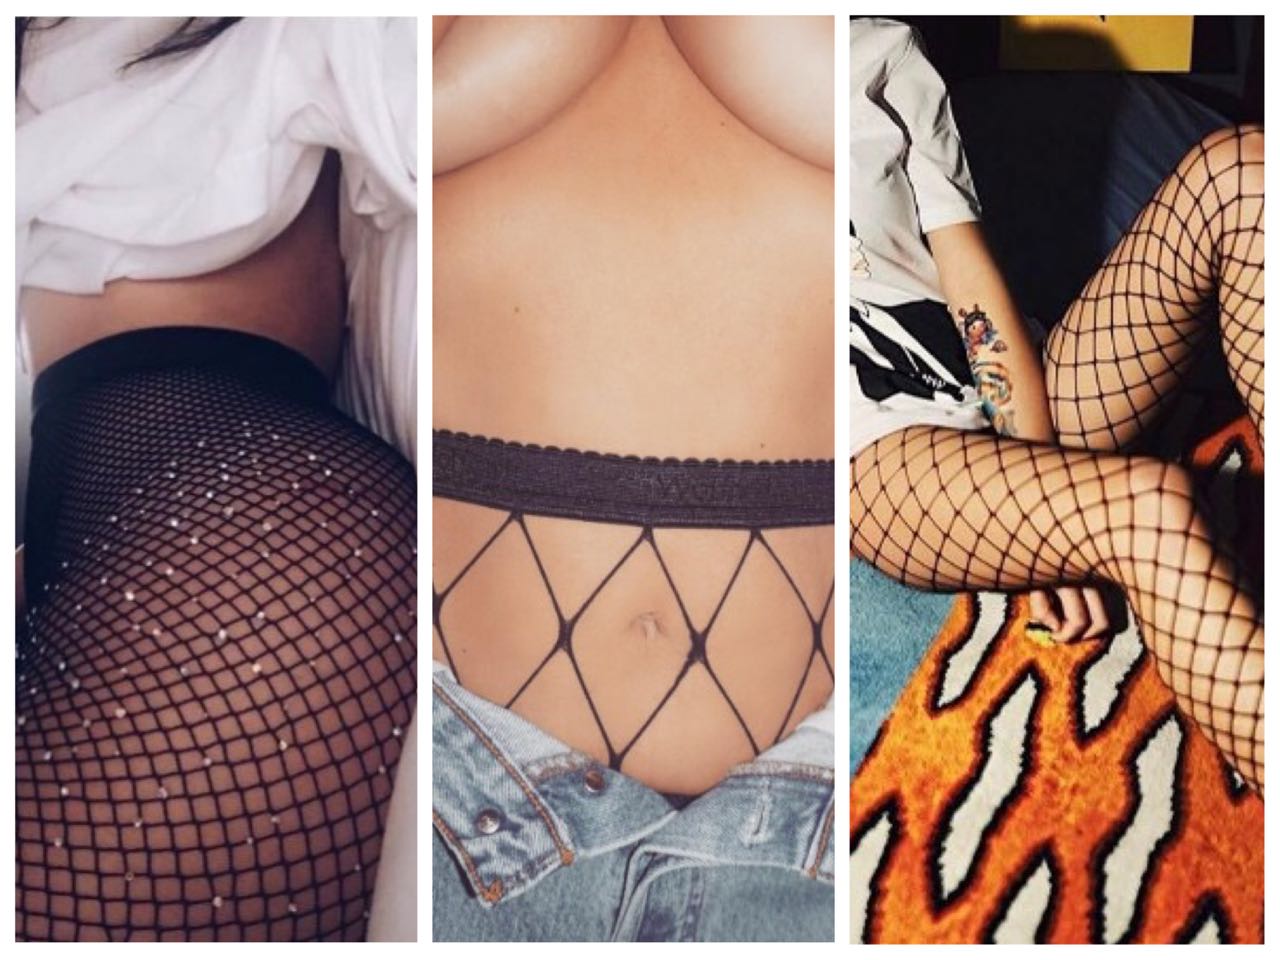 Fishnets Are Taking Over Fashion One Social Media Post At A Time